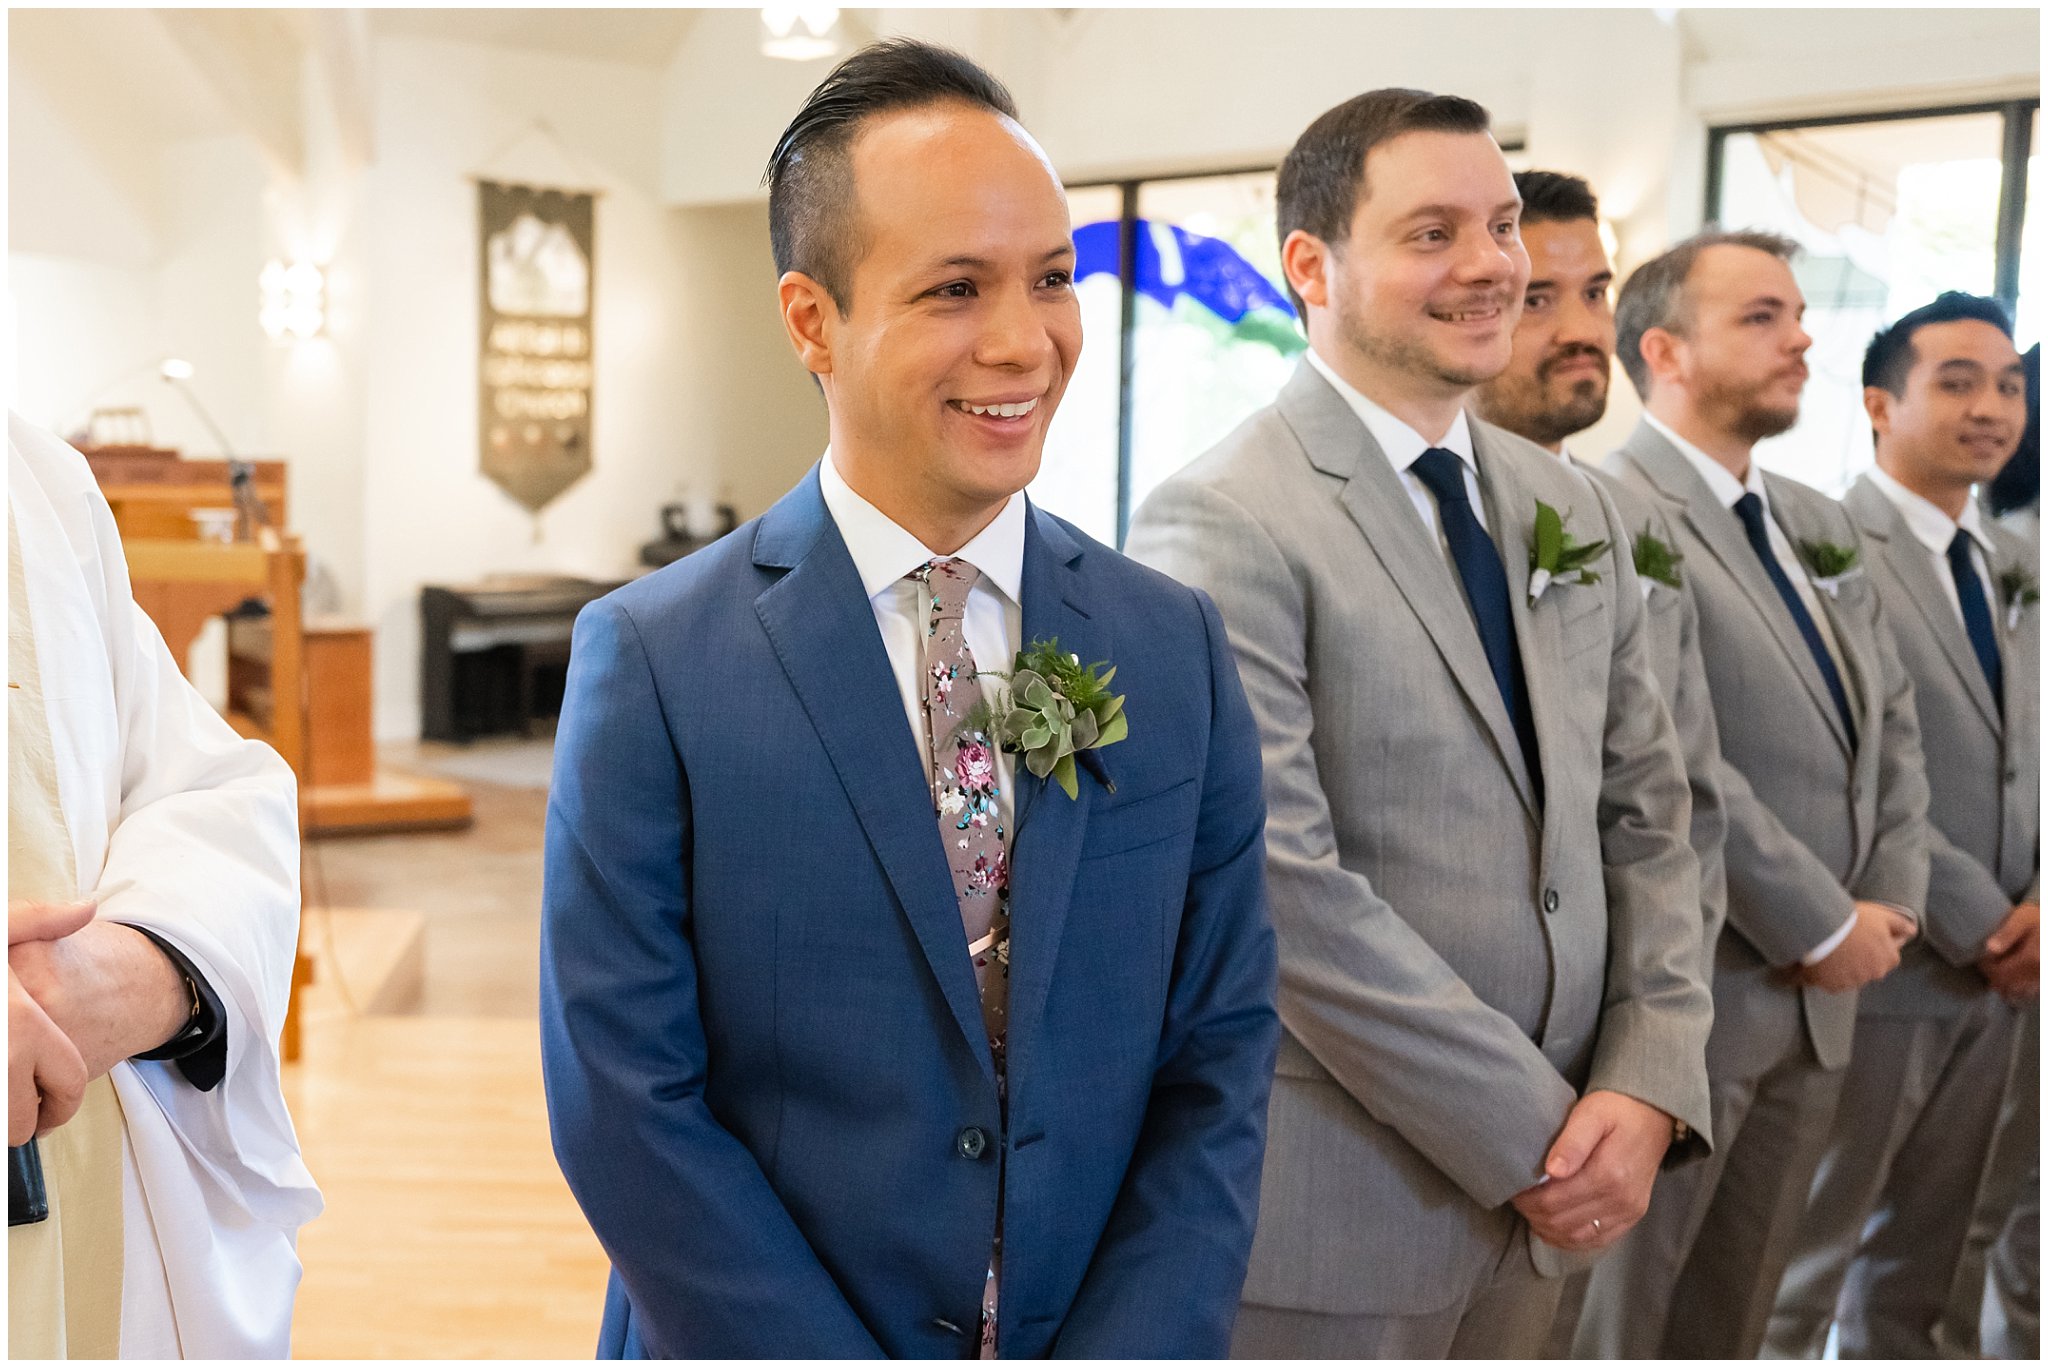 Wedding ceremony in episcopal church | Cactus and Tropicals and Salt Lake Church Wedding | Jessie and Dallin Photography